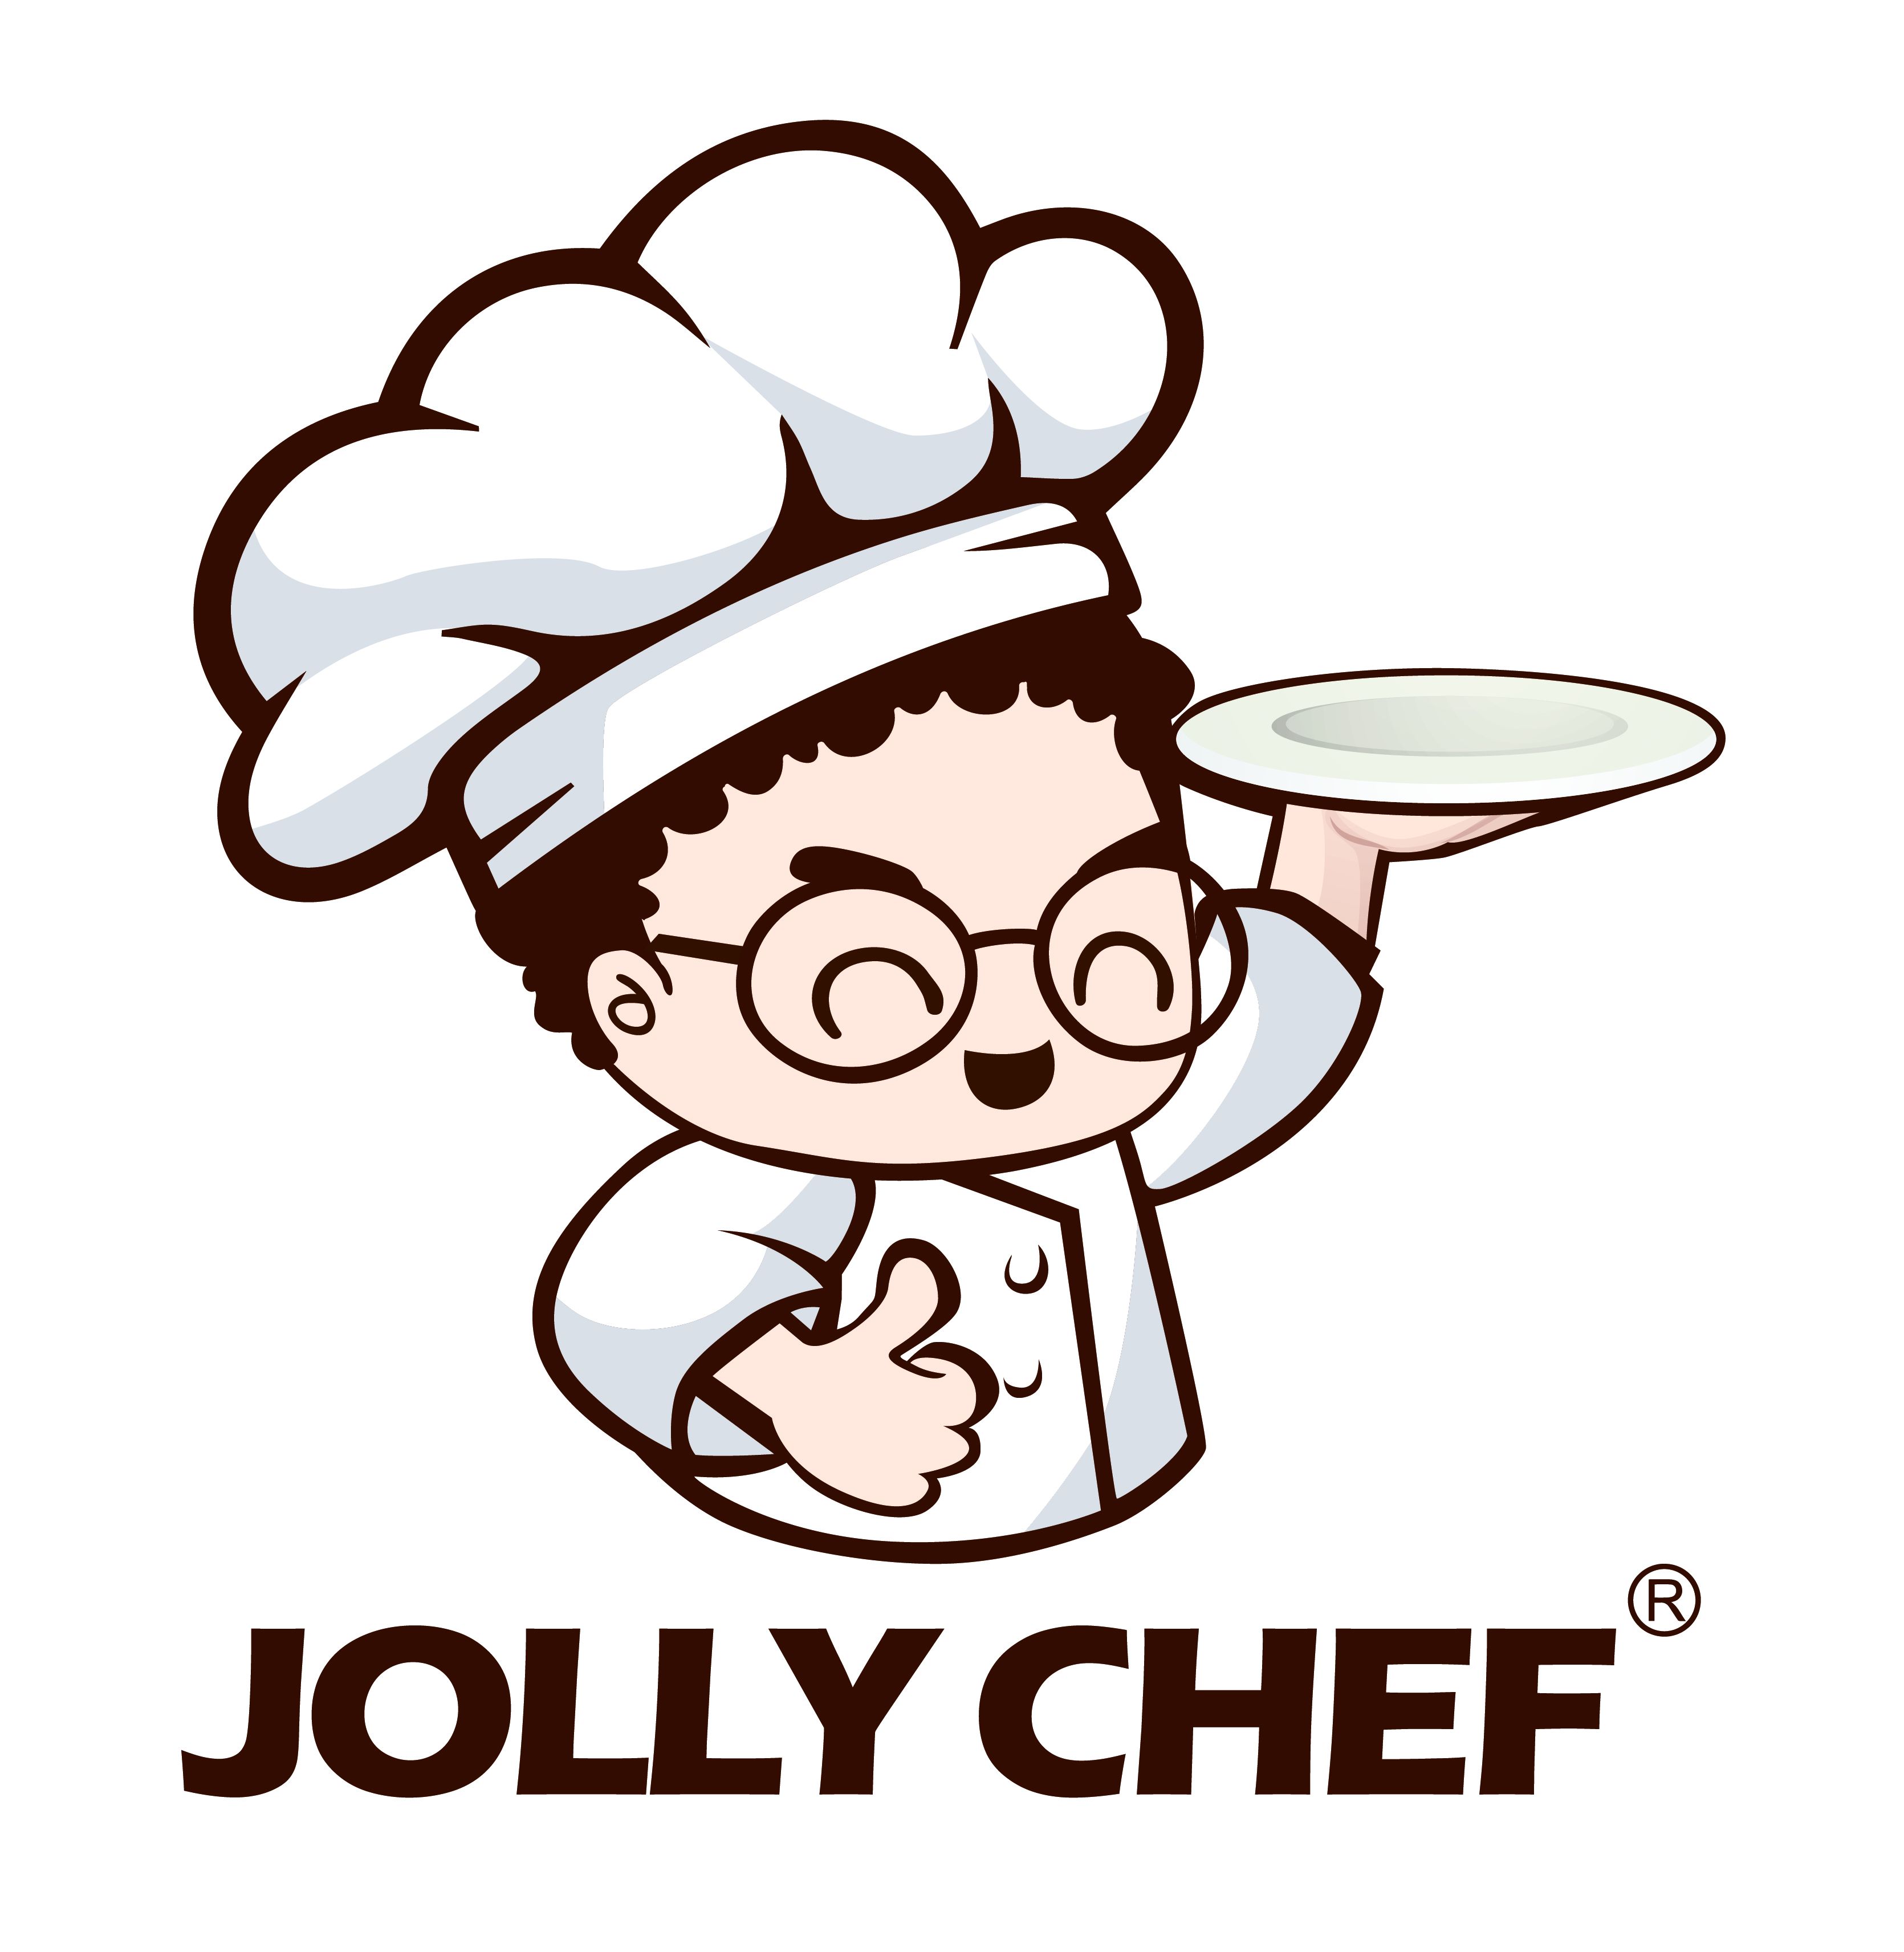 JOLLY CHEF 100 Disposable Plastic Bowls 12oz Premium Heavy Duty Disposable Dinner Bowls Reusable and Great for Parties or Weddings 